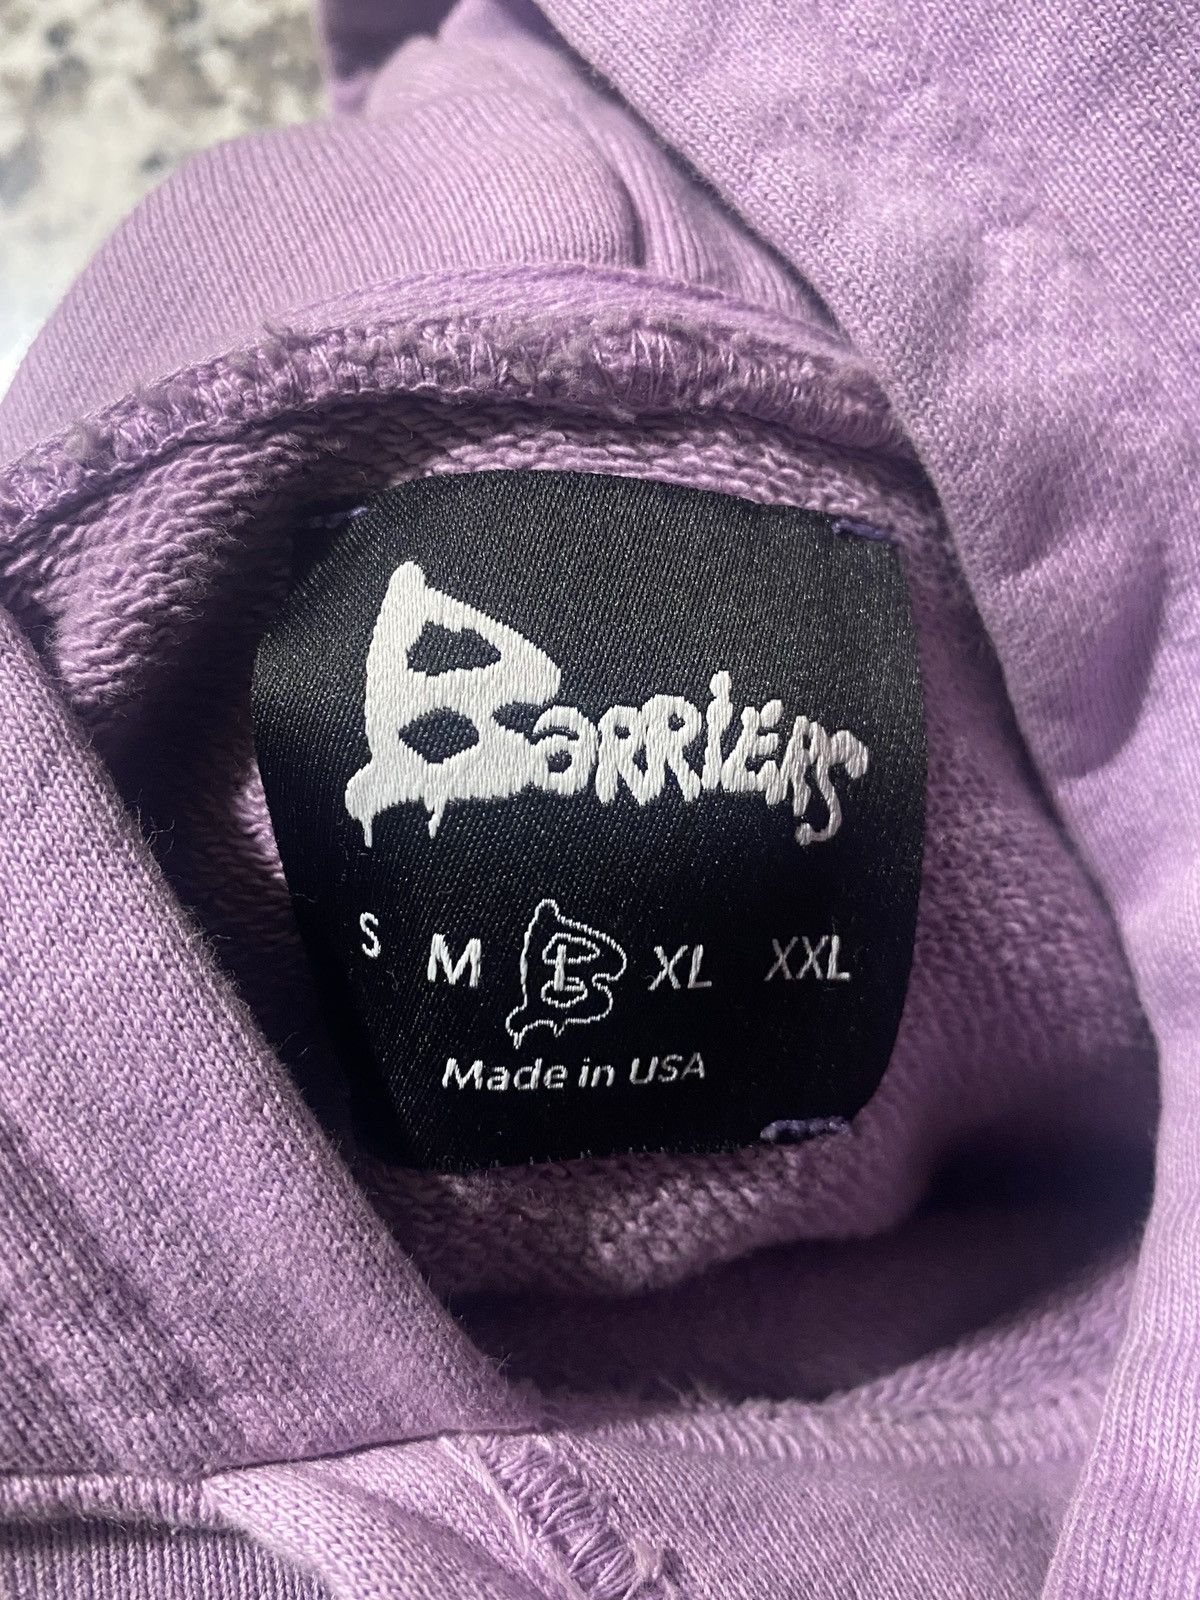 Barriers Barriers worldwide hoodie Size US L / EU 52-54 / 3 - 2 Preview